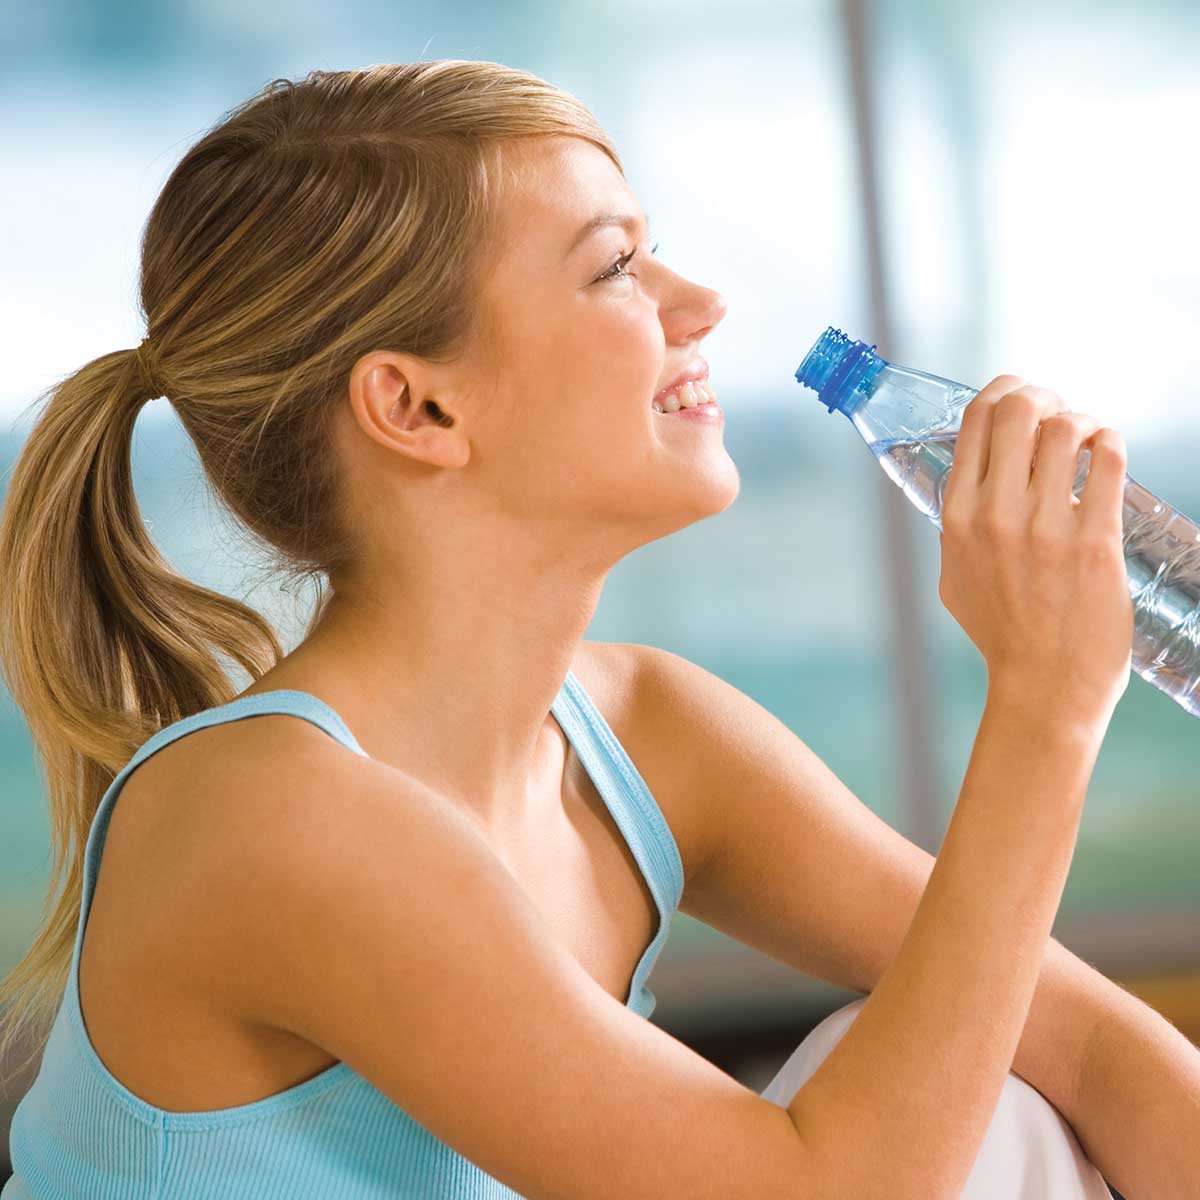 Young woman drinking water to stay hydrated